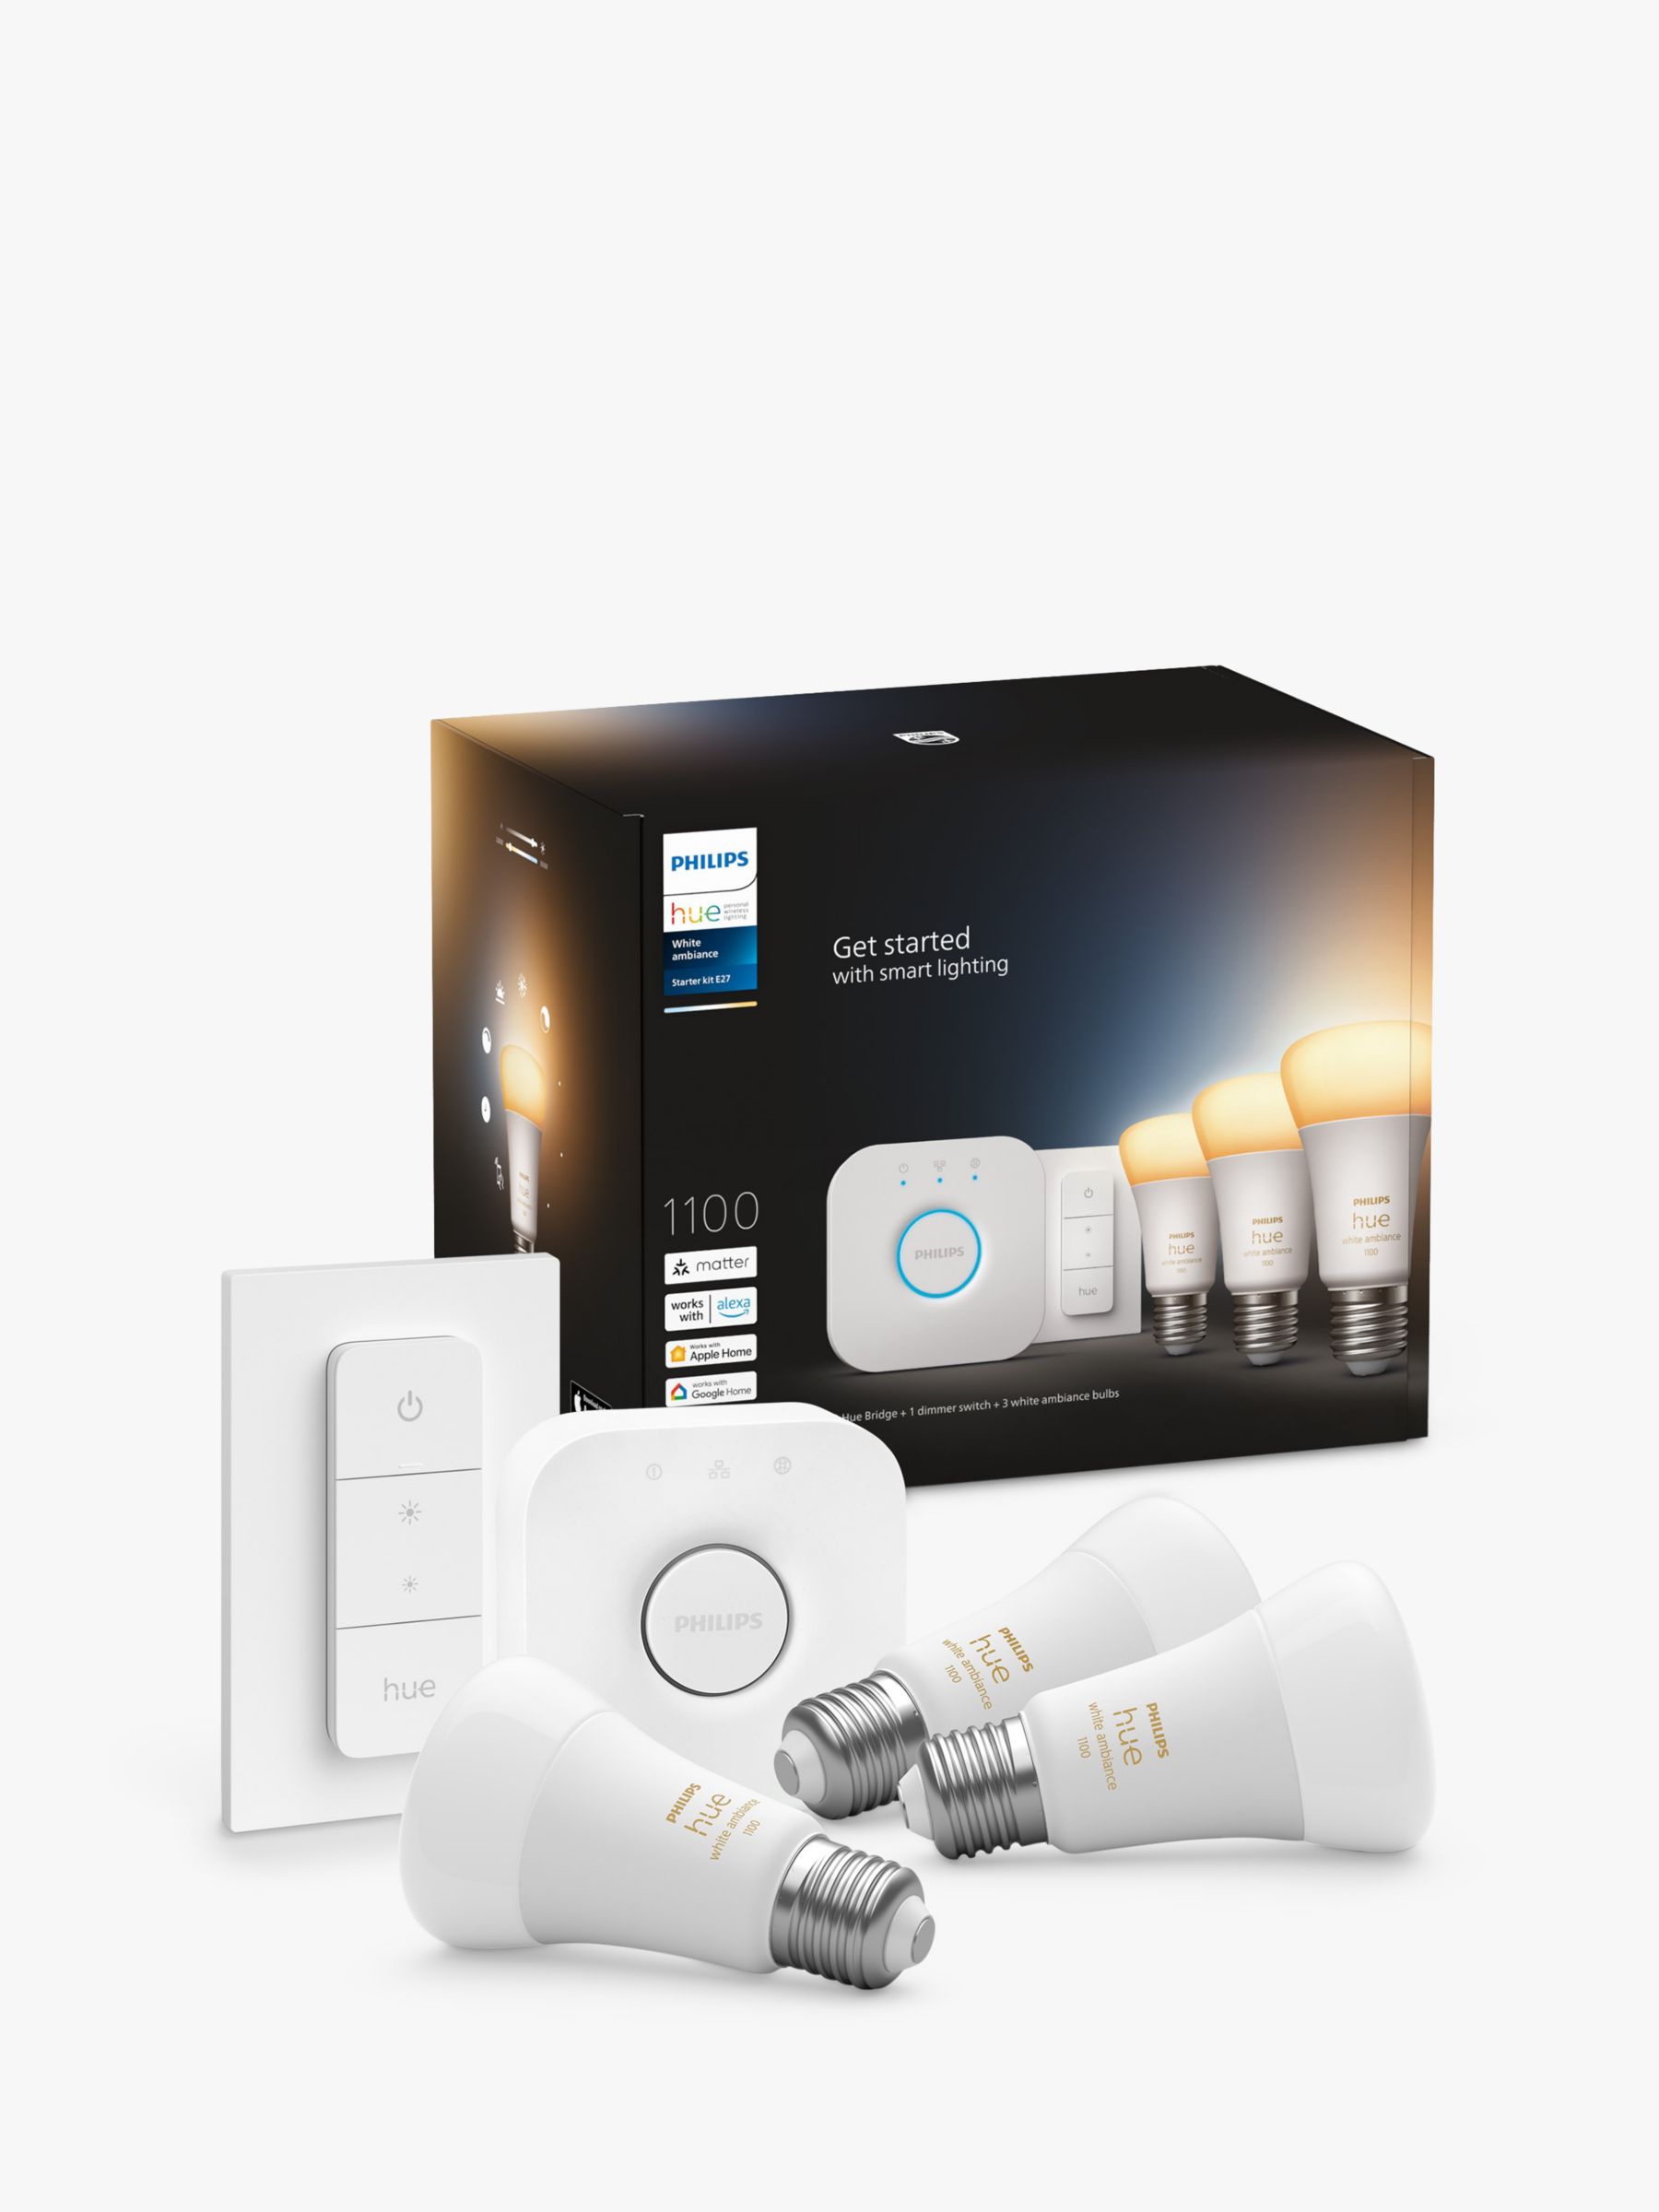 Philips Hue Ambiance Wireless LED Starter Kit with 3 E27 Bulbs with Bluetooth, Dimmer Switch & Bridge